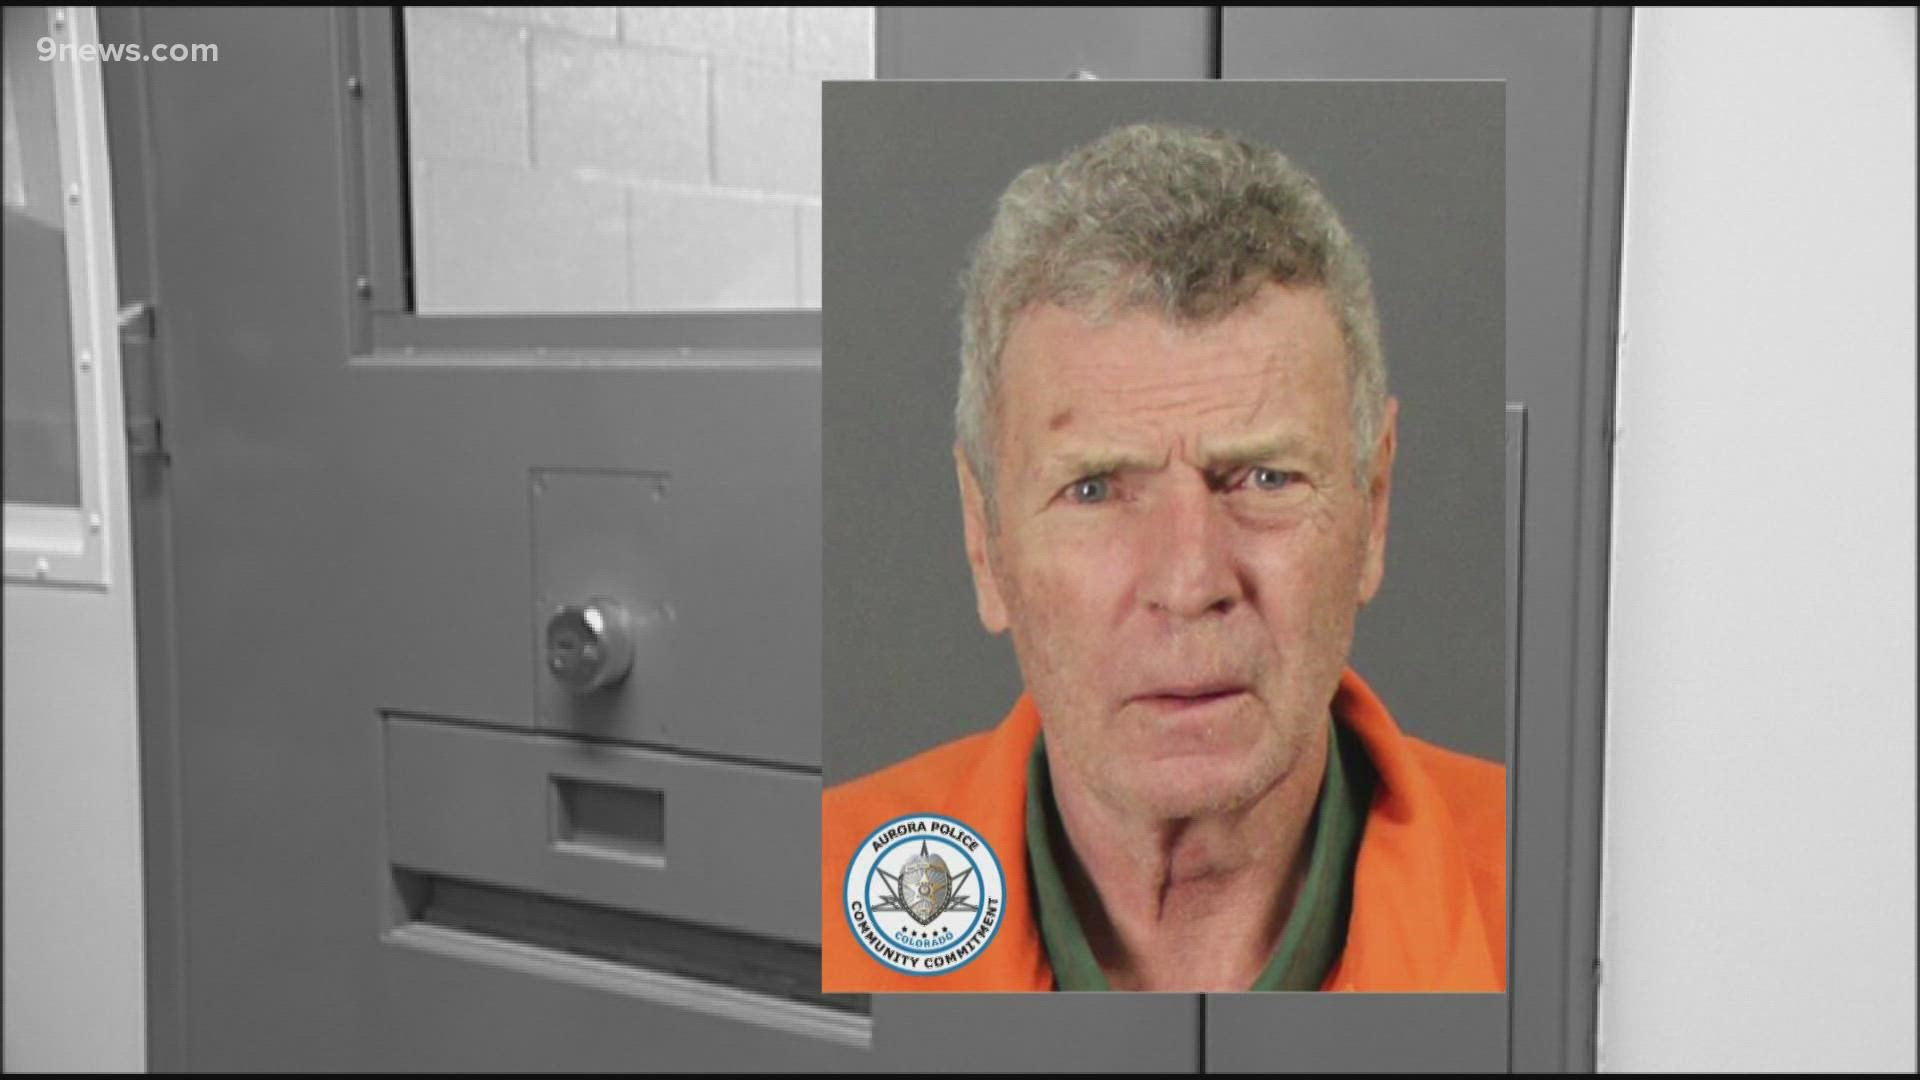 Kenneth Dean Lee is accused of sexually assaulting a 7-year-old girl about 18 months after his release following convictions in two similar cases.